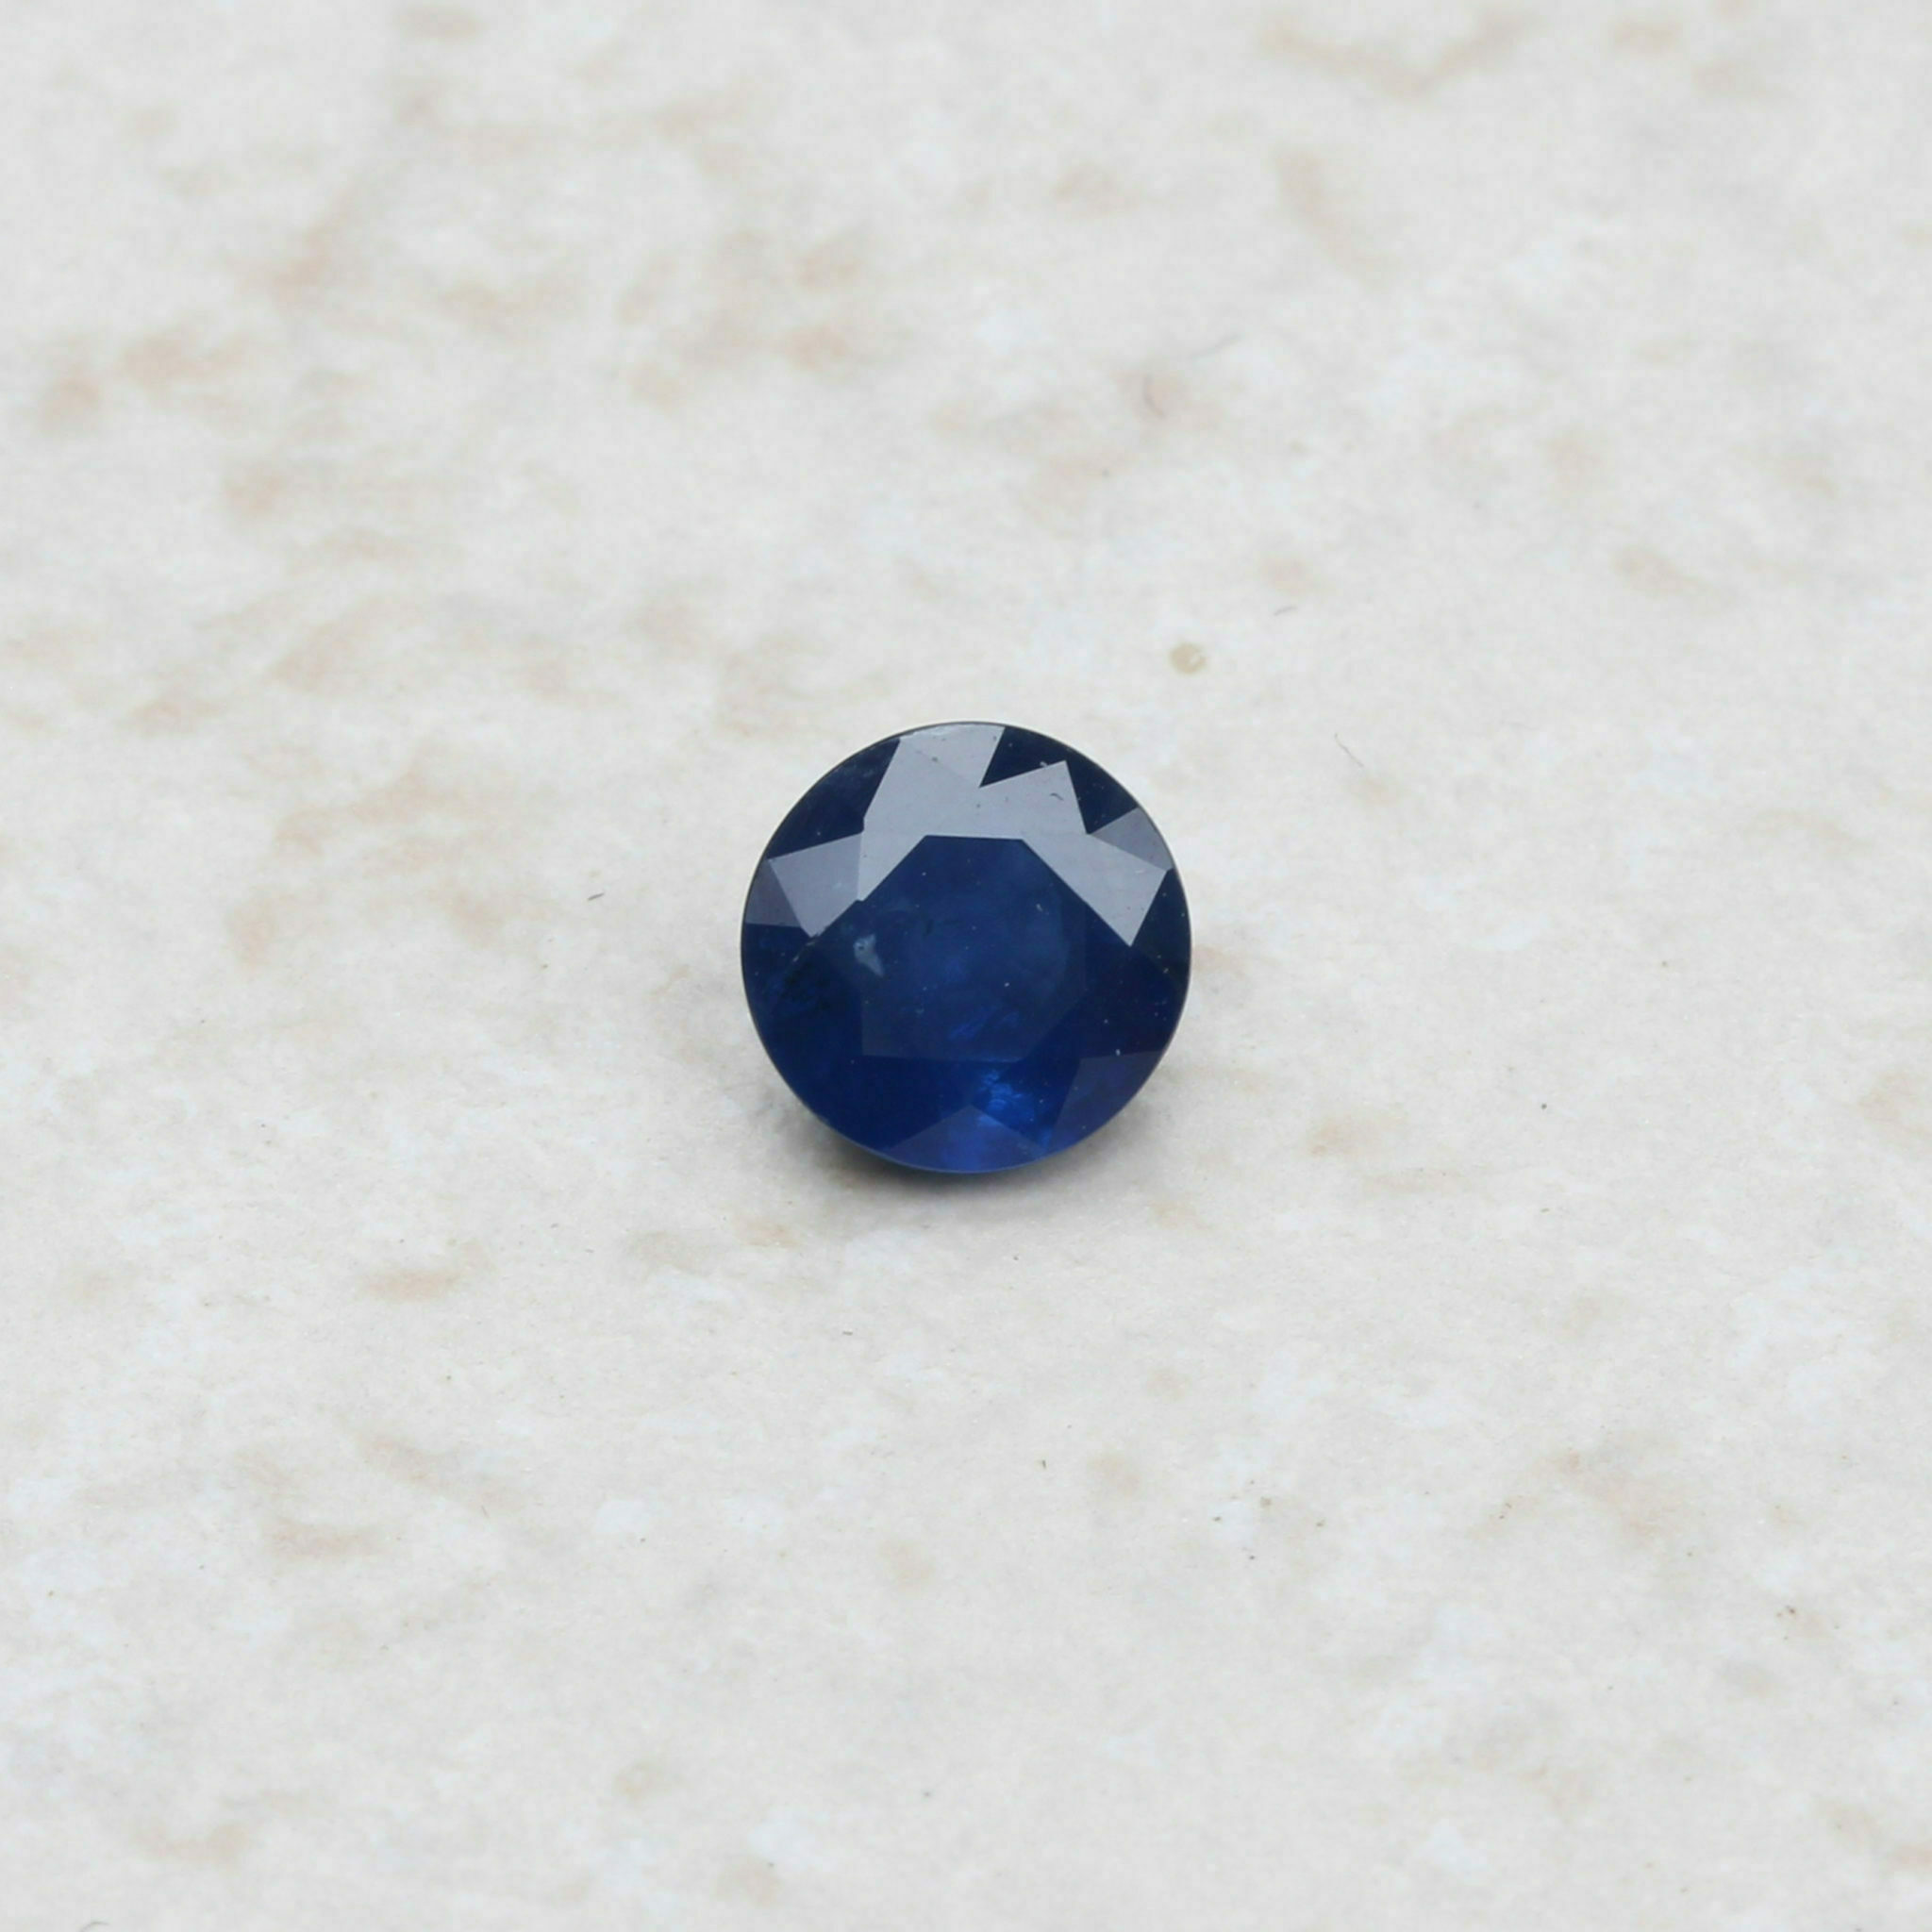 Details about  / 1.39 Cts Natural Blue Sapphire Round Cut 2 mm Lot 25 Pcs Calibrated Loose Gems